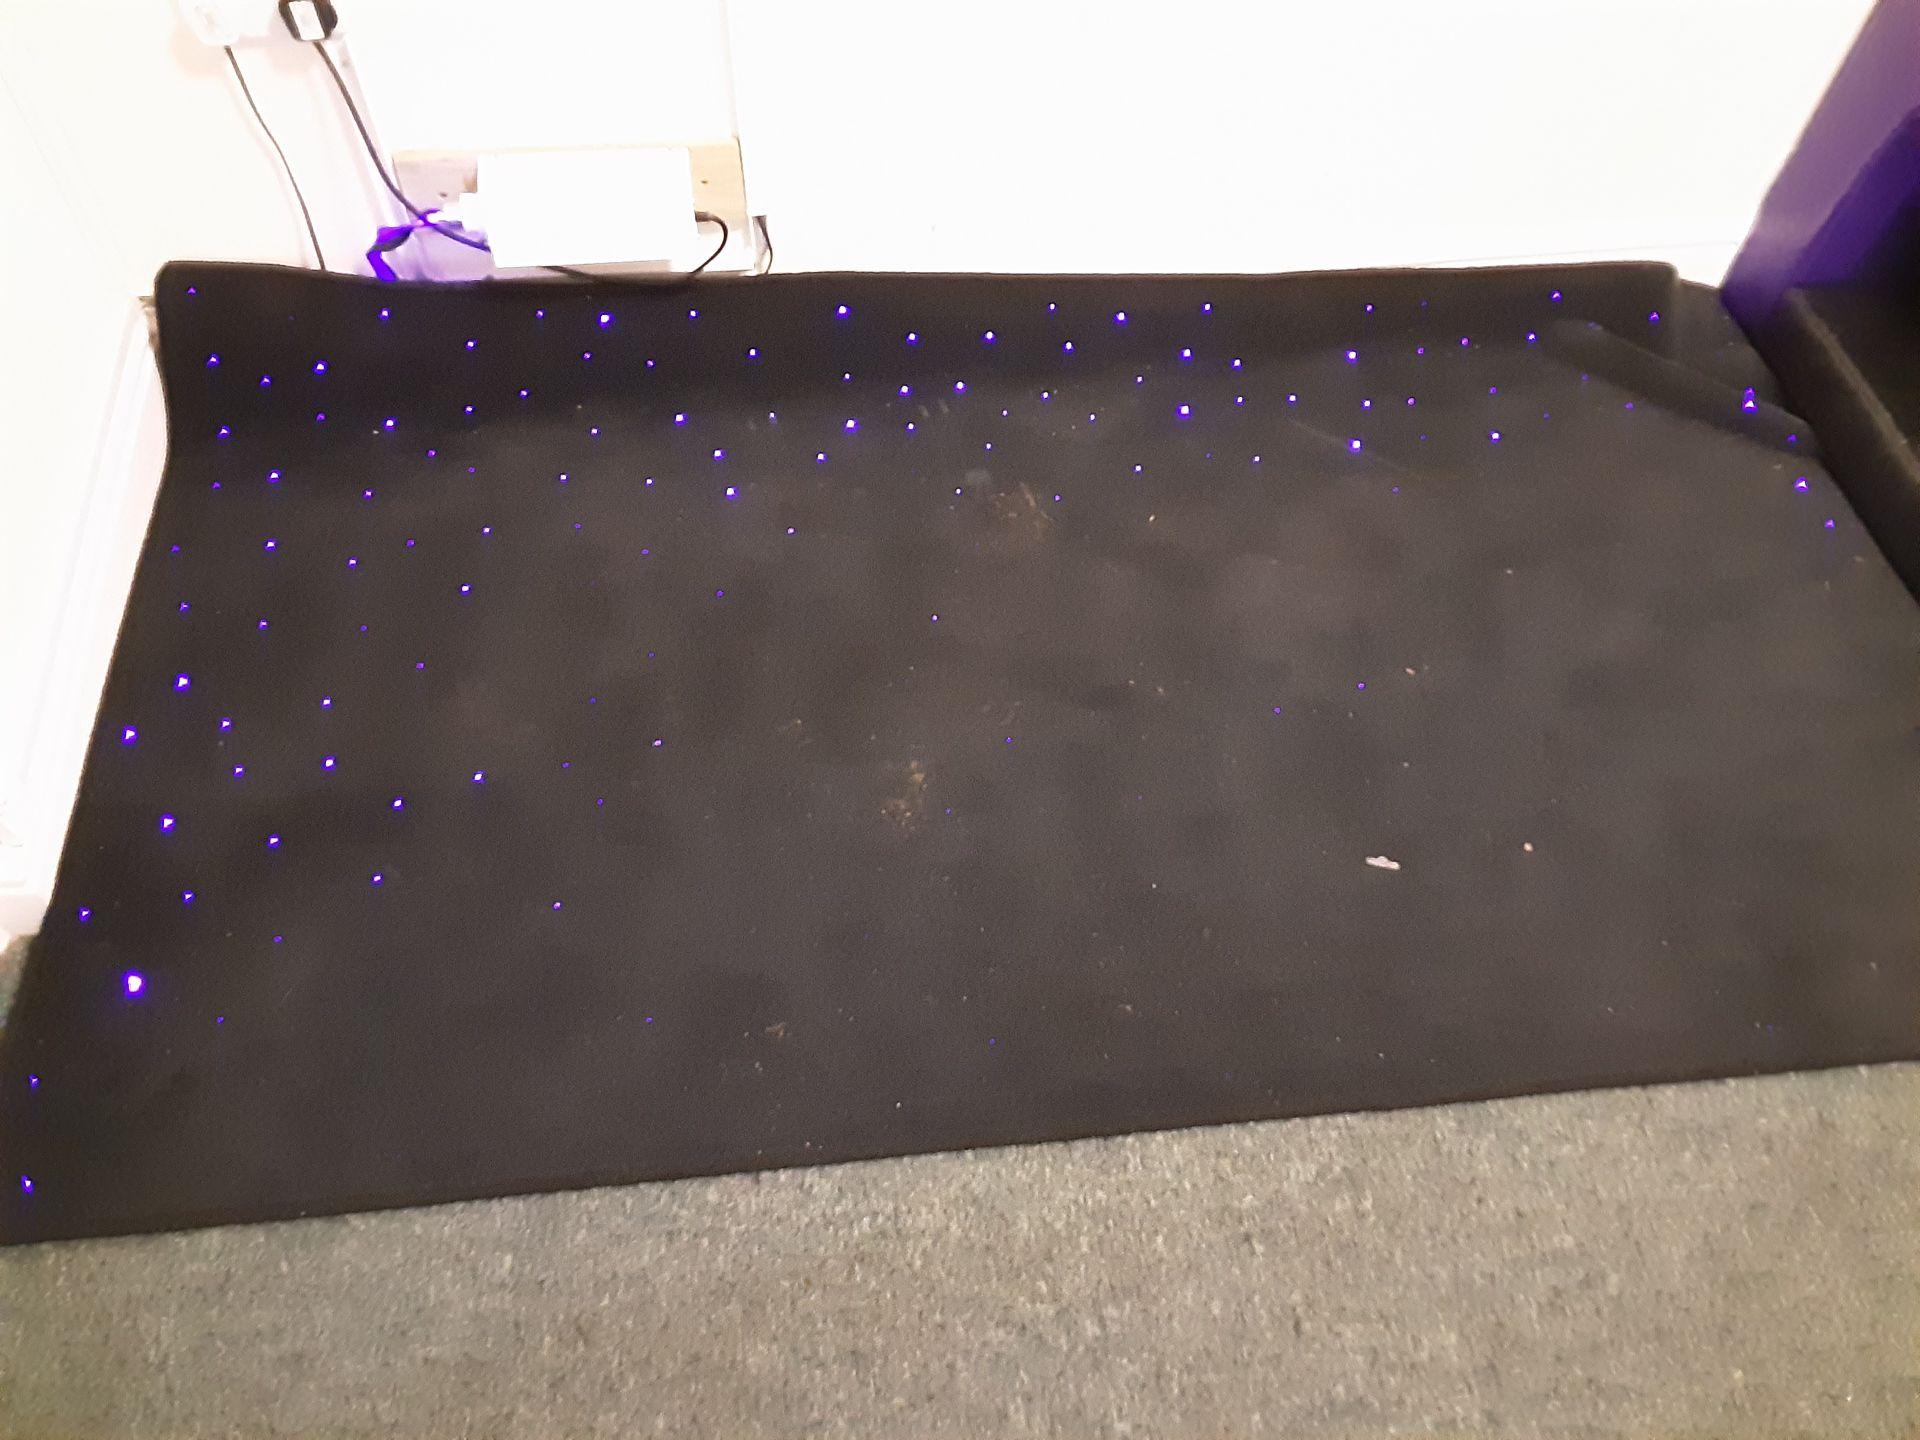 Contents of Sensory Room To Include SpaceKraft Light & Sound Therapy Station with Cushions, Lights & - Image 16 of 18